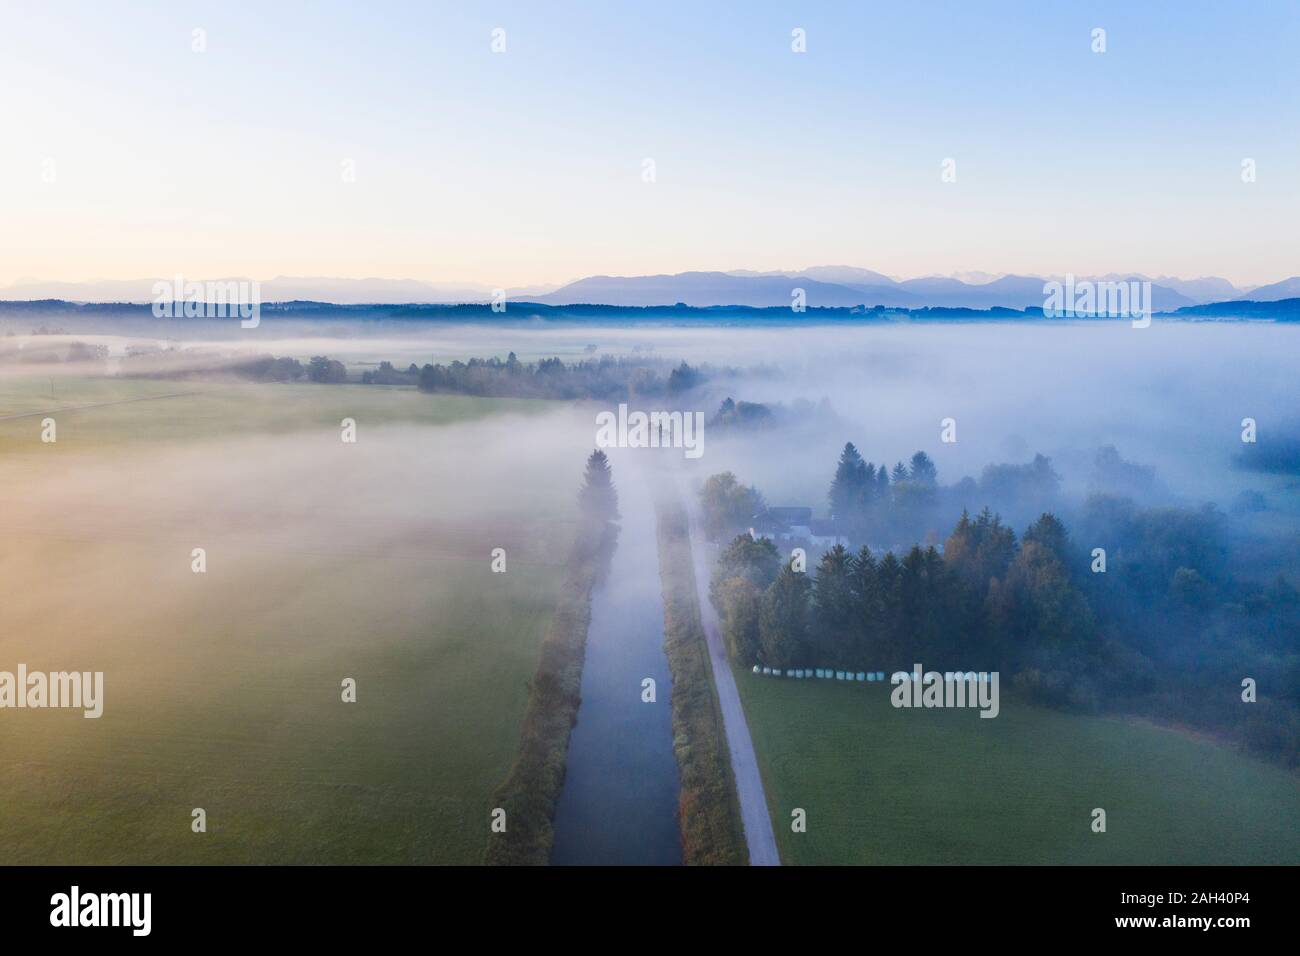 Germany, Bavaria, Geretsried, Aerial view of Loisach river canal at foggy dawn Stock Photo